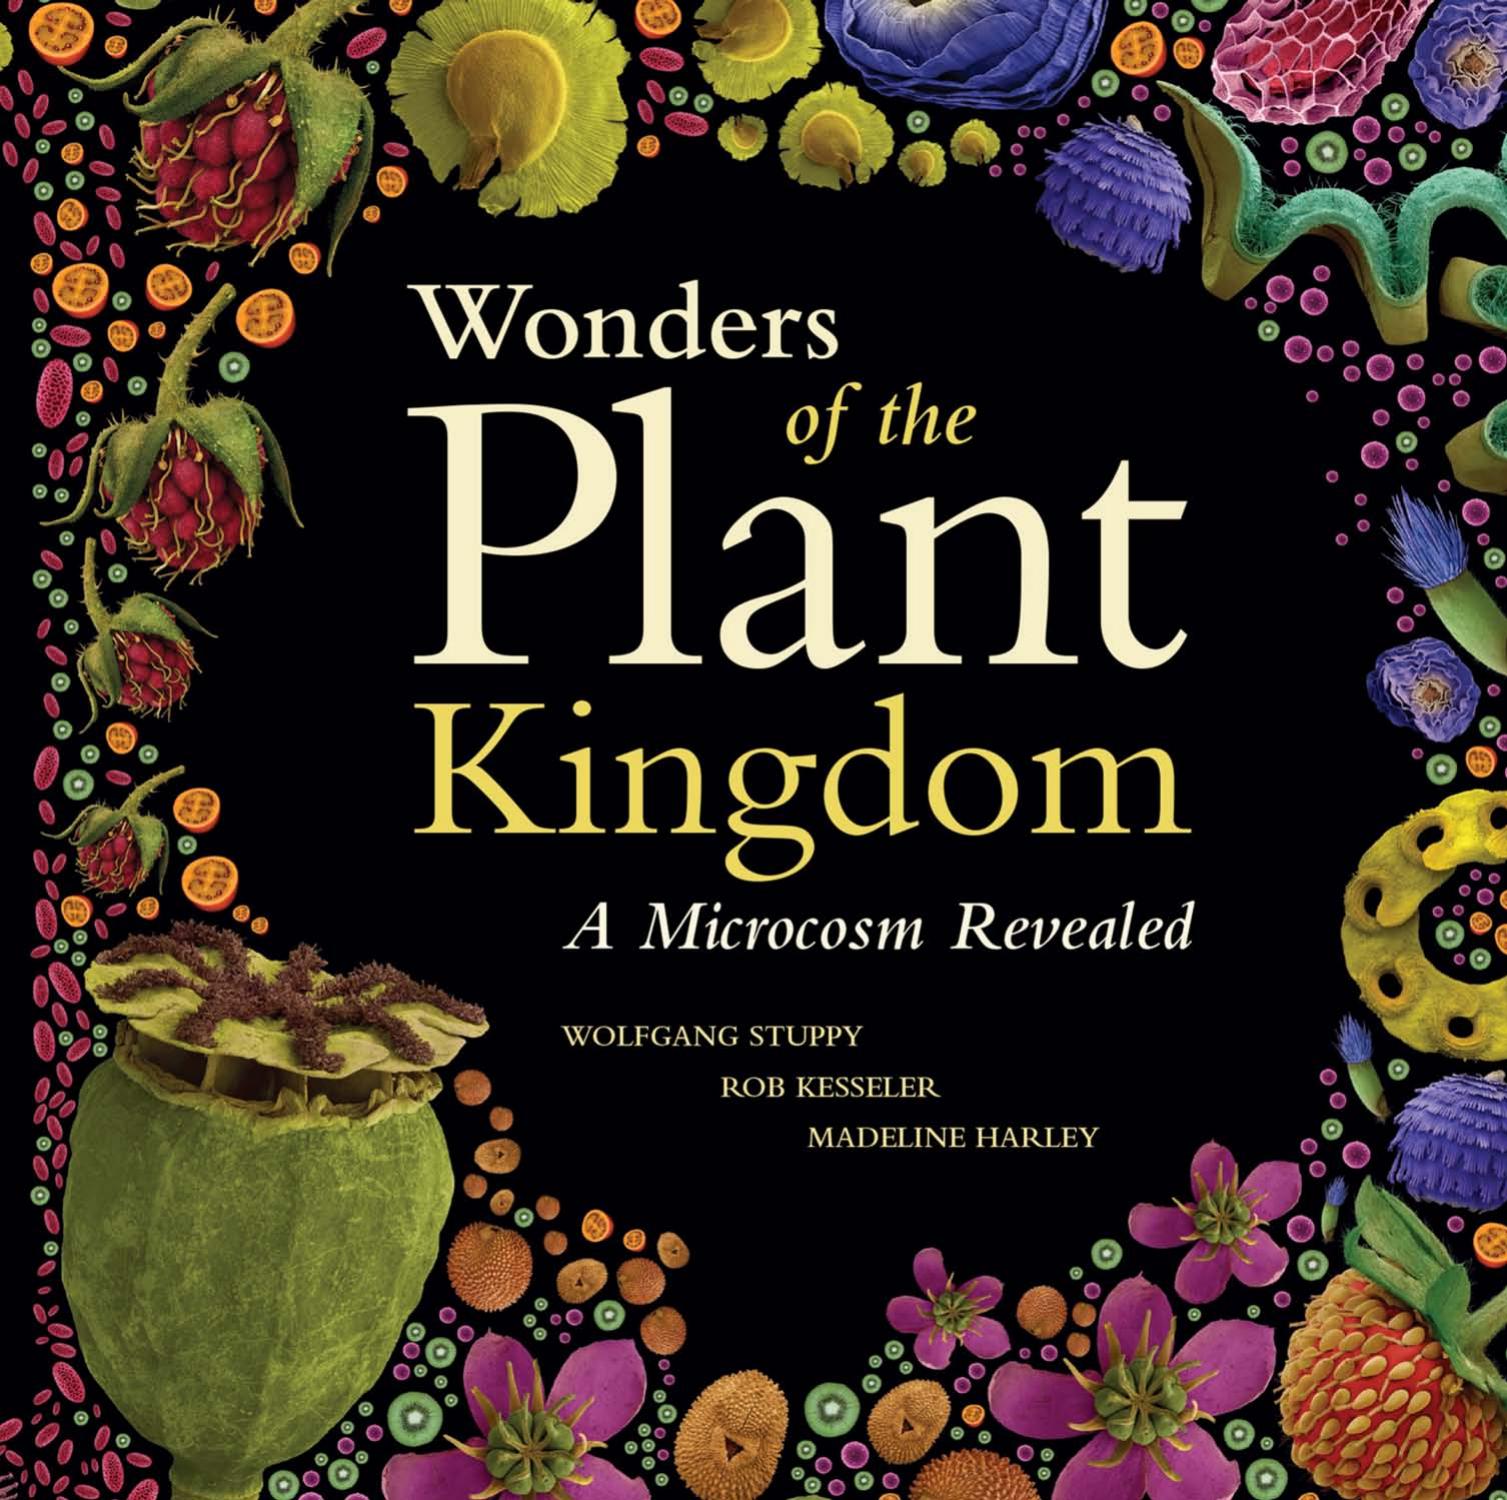 Wonders of the Plant Kingdom: A Microcosm Revealed by Wolfgang Stuppy and Rob Kesseler and Madeline Harley